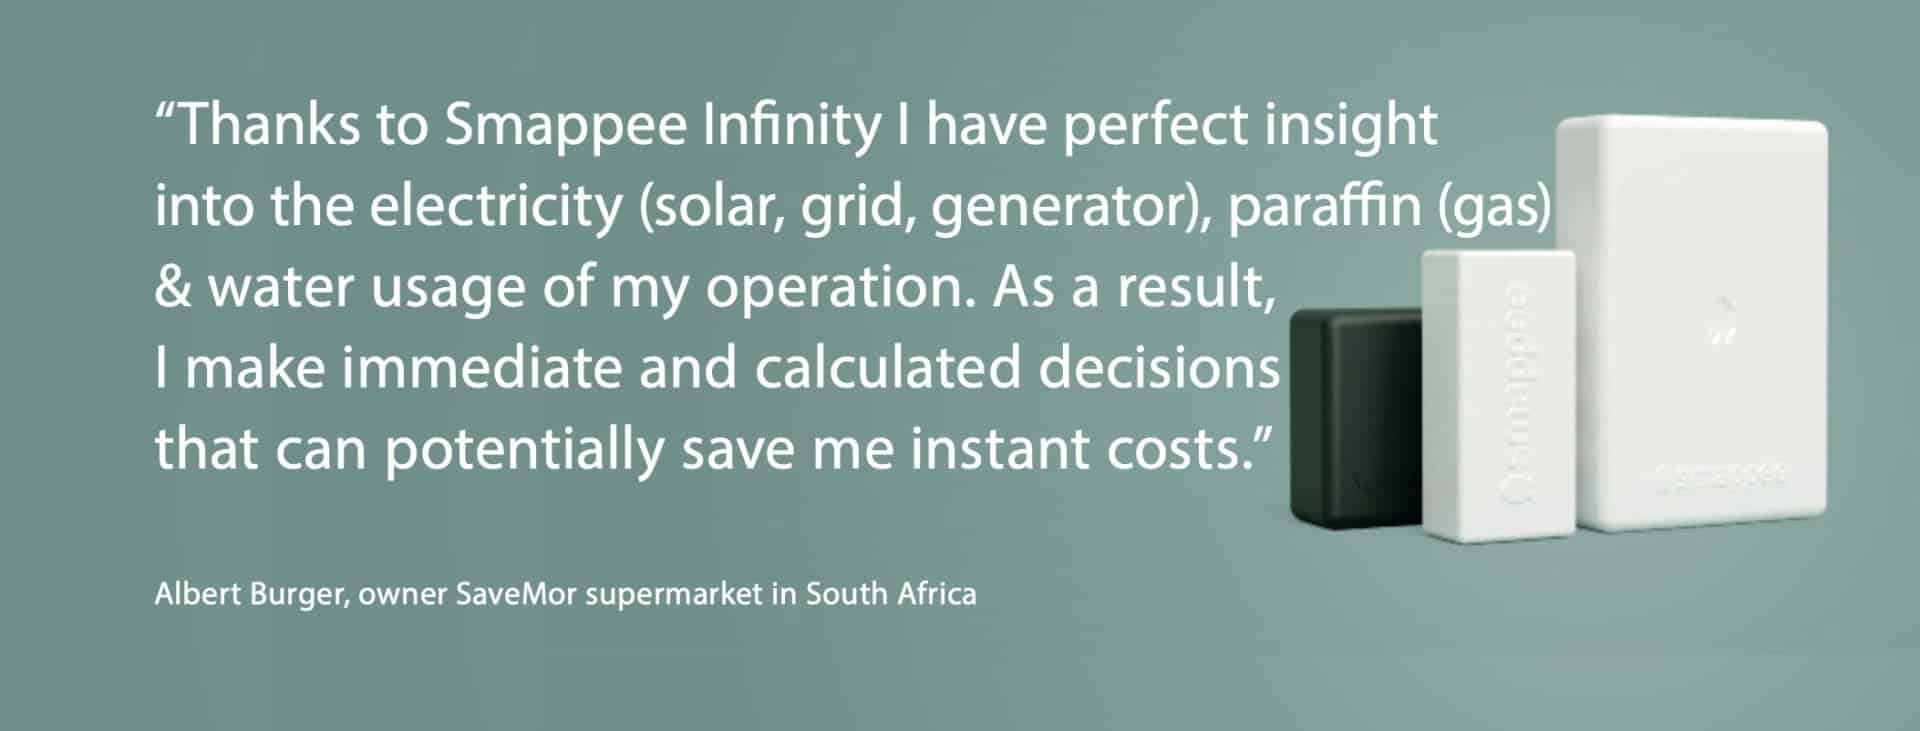 Smappee saves Spar supermarkets energy & costs